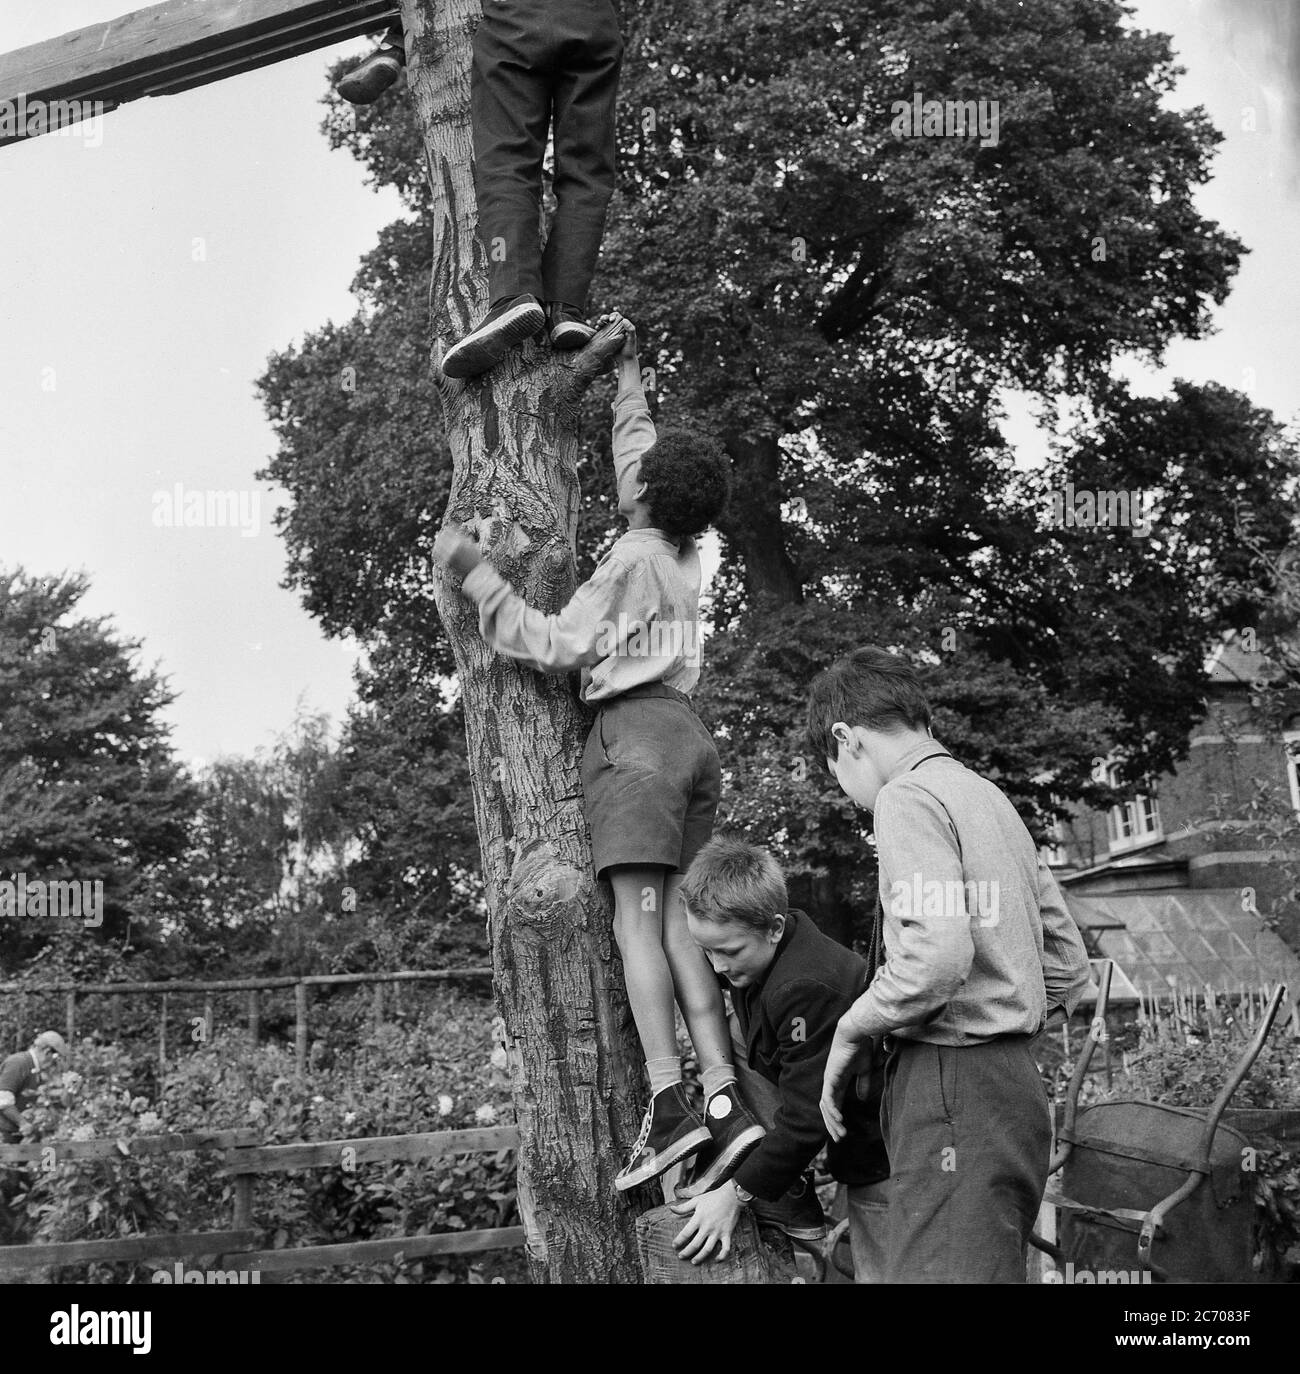 1960s, historical, a schoolboy helping another boy with a lift-up as he climbs the trunk of a tree outside in an urban garden area, South East London, England, UK. Stock Photo